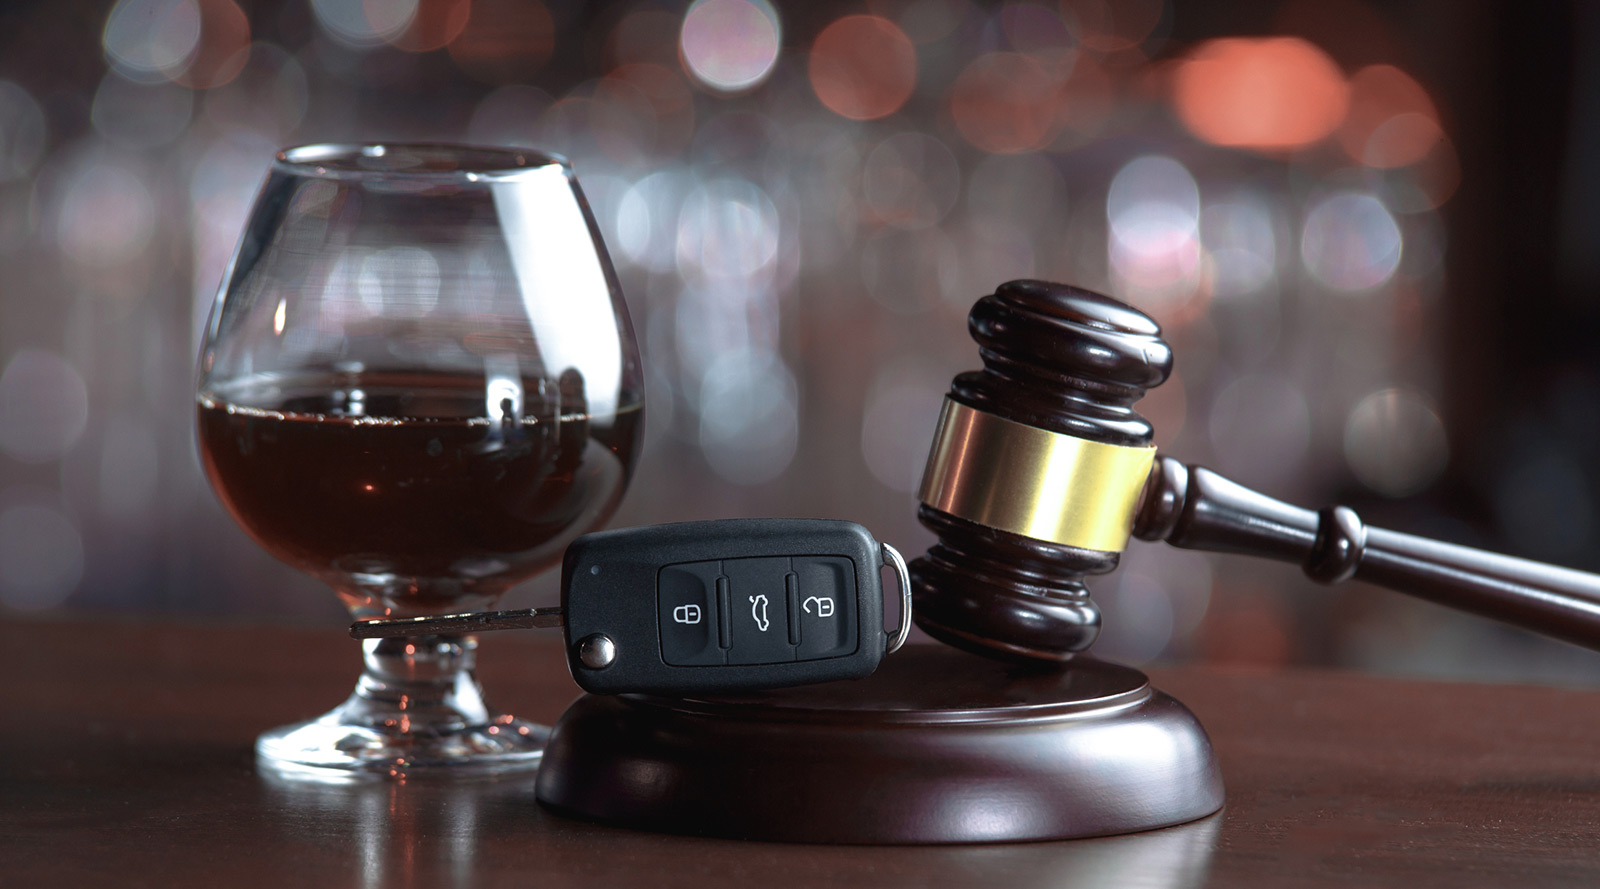 Gavel-alcohol-and-car-keys-on-wooden-table